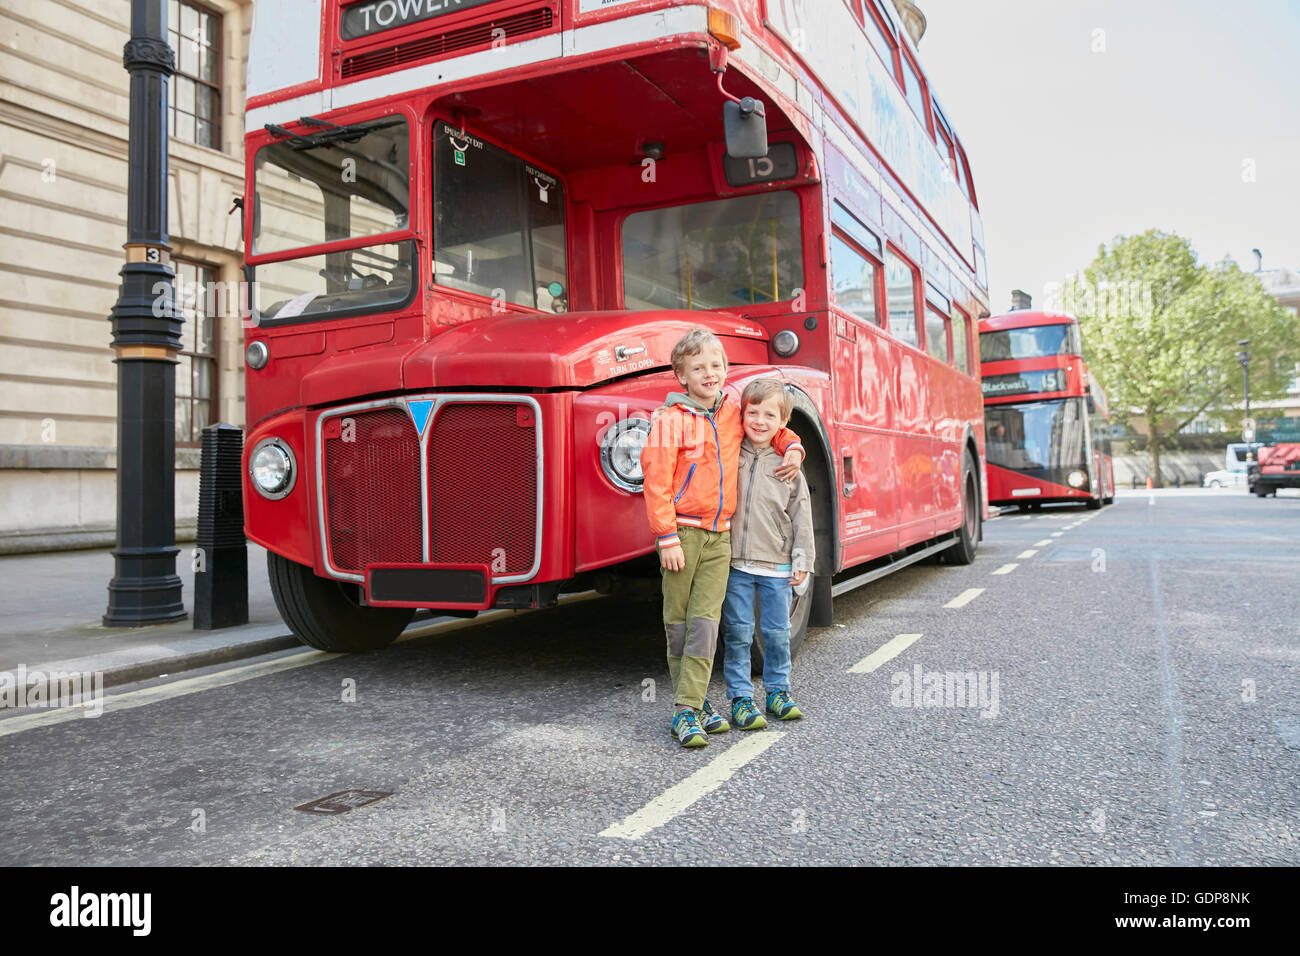 Boys in front of red double decker bus Stock Photo